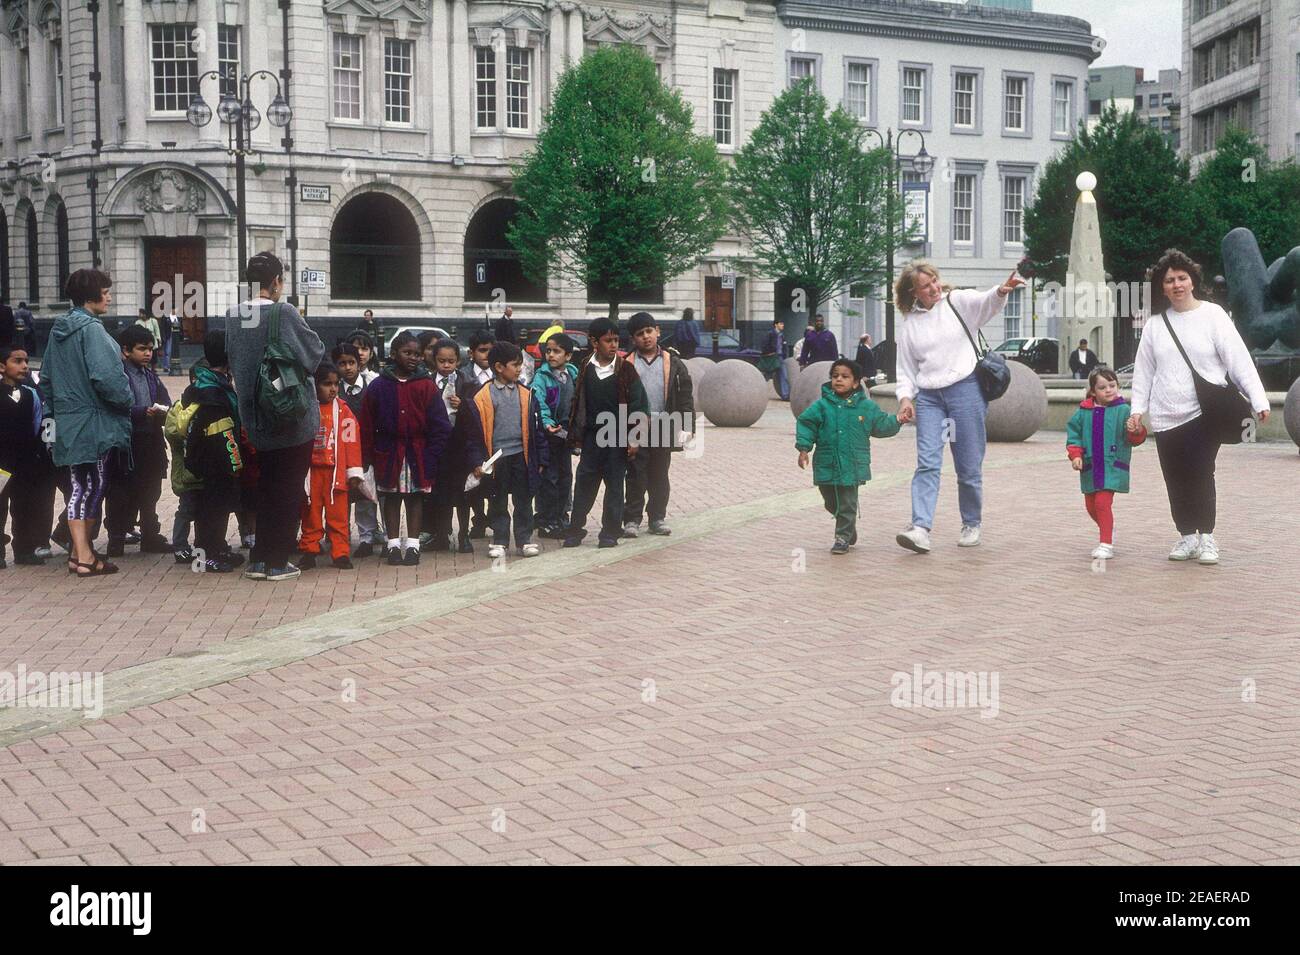 A lunchtime anthology of images taken in an hour on the 10 September 1993 records shoppers, office workers, city officials, parents and children, teachers and pupils going about their business with a background of the UK Midlands city of Birmingham. Stock Photo